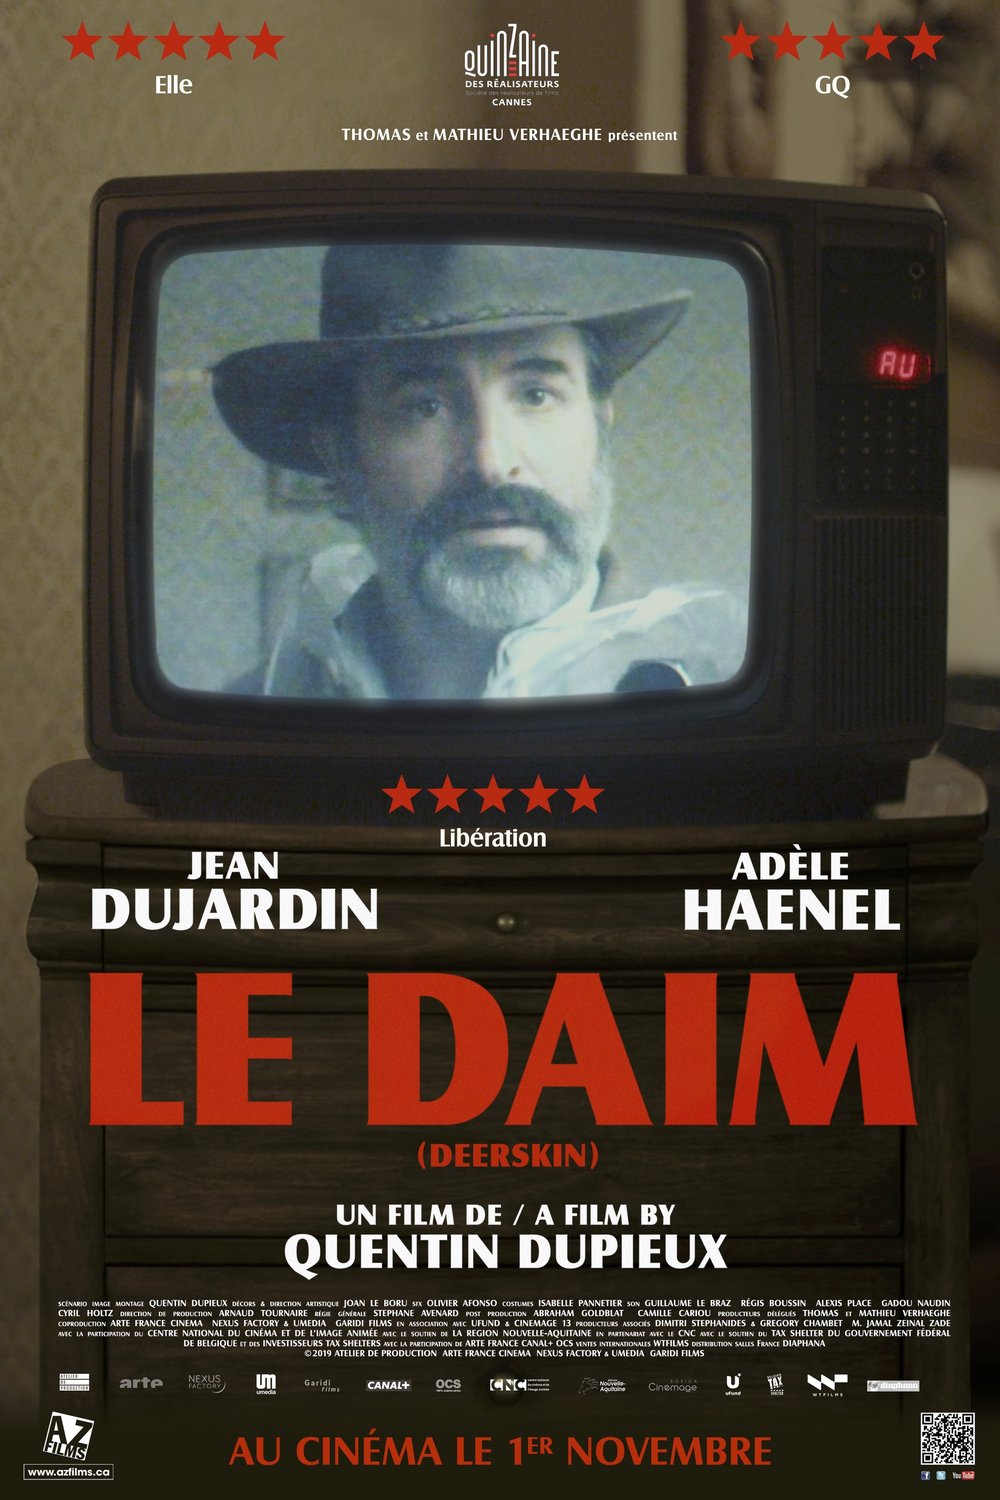 Poster of the movie Le Daim